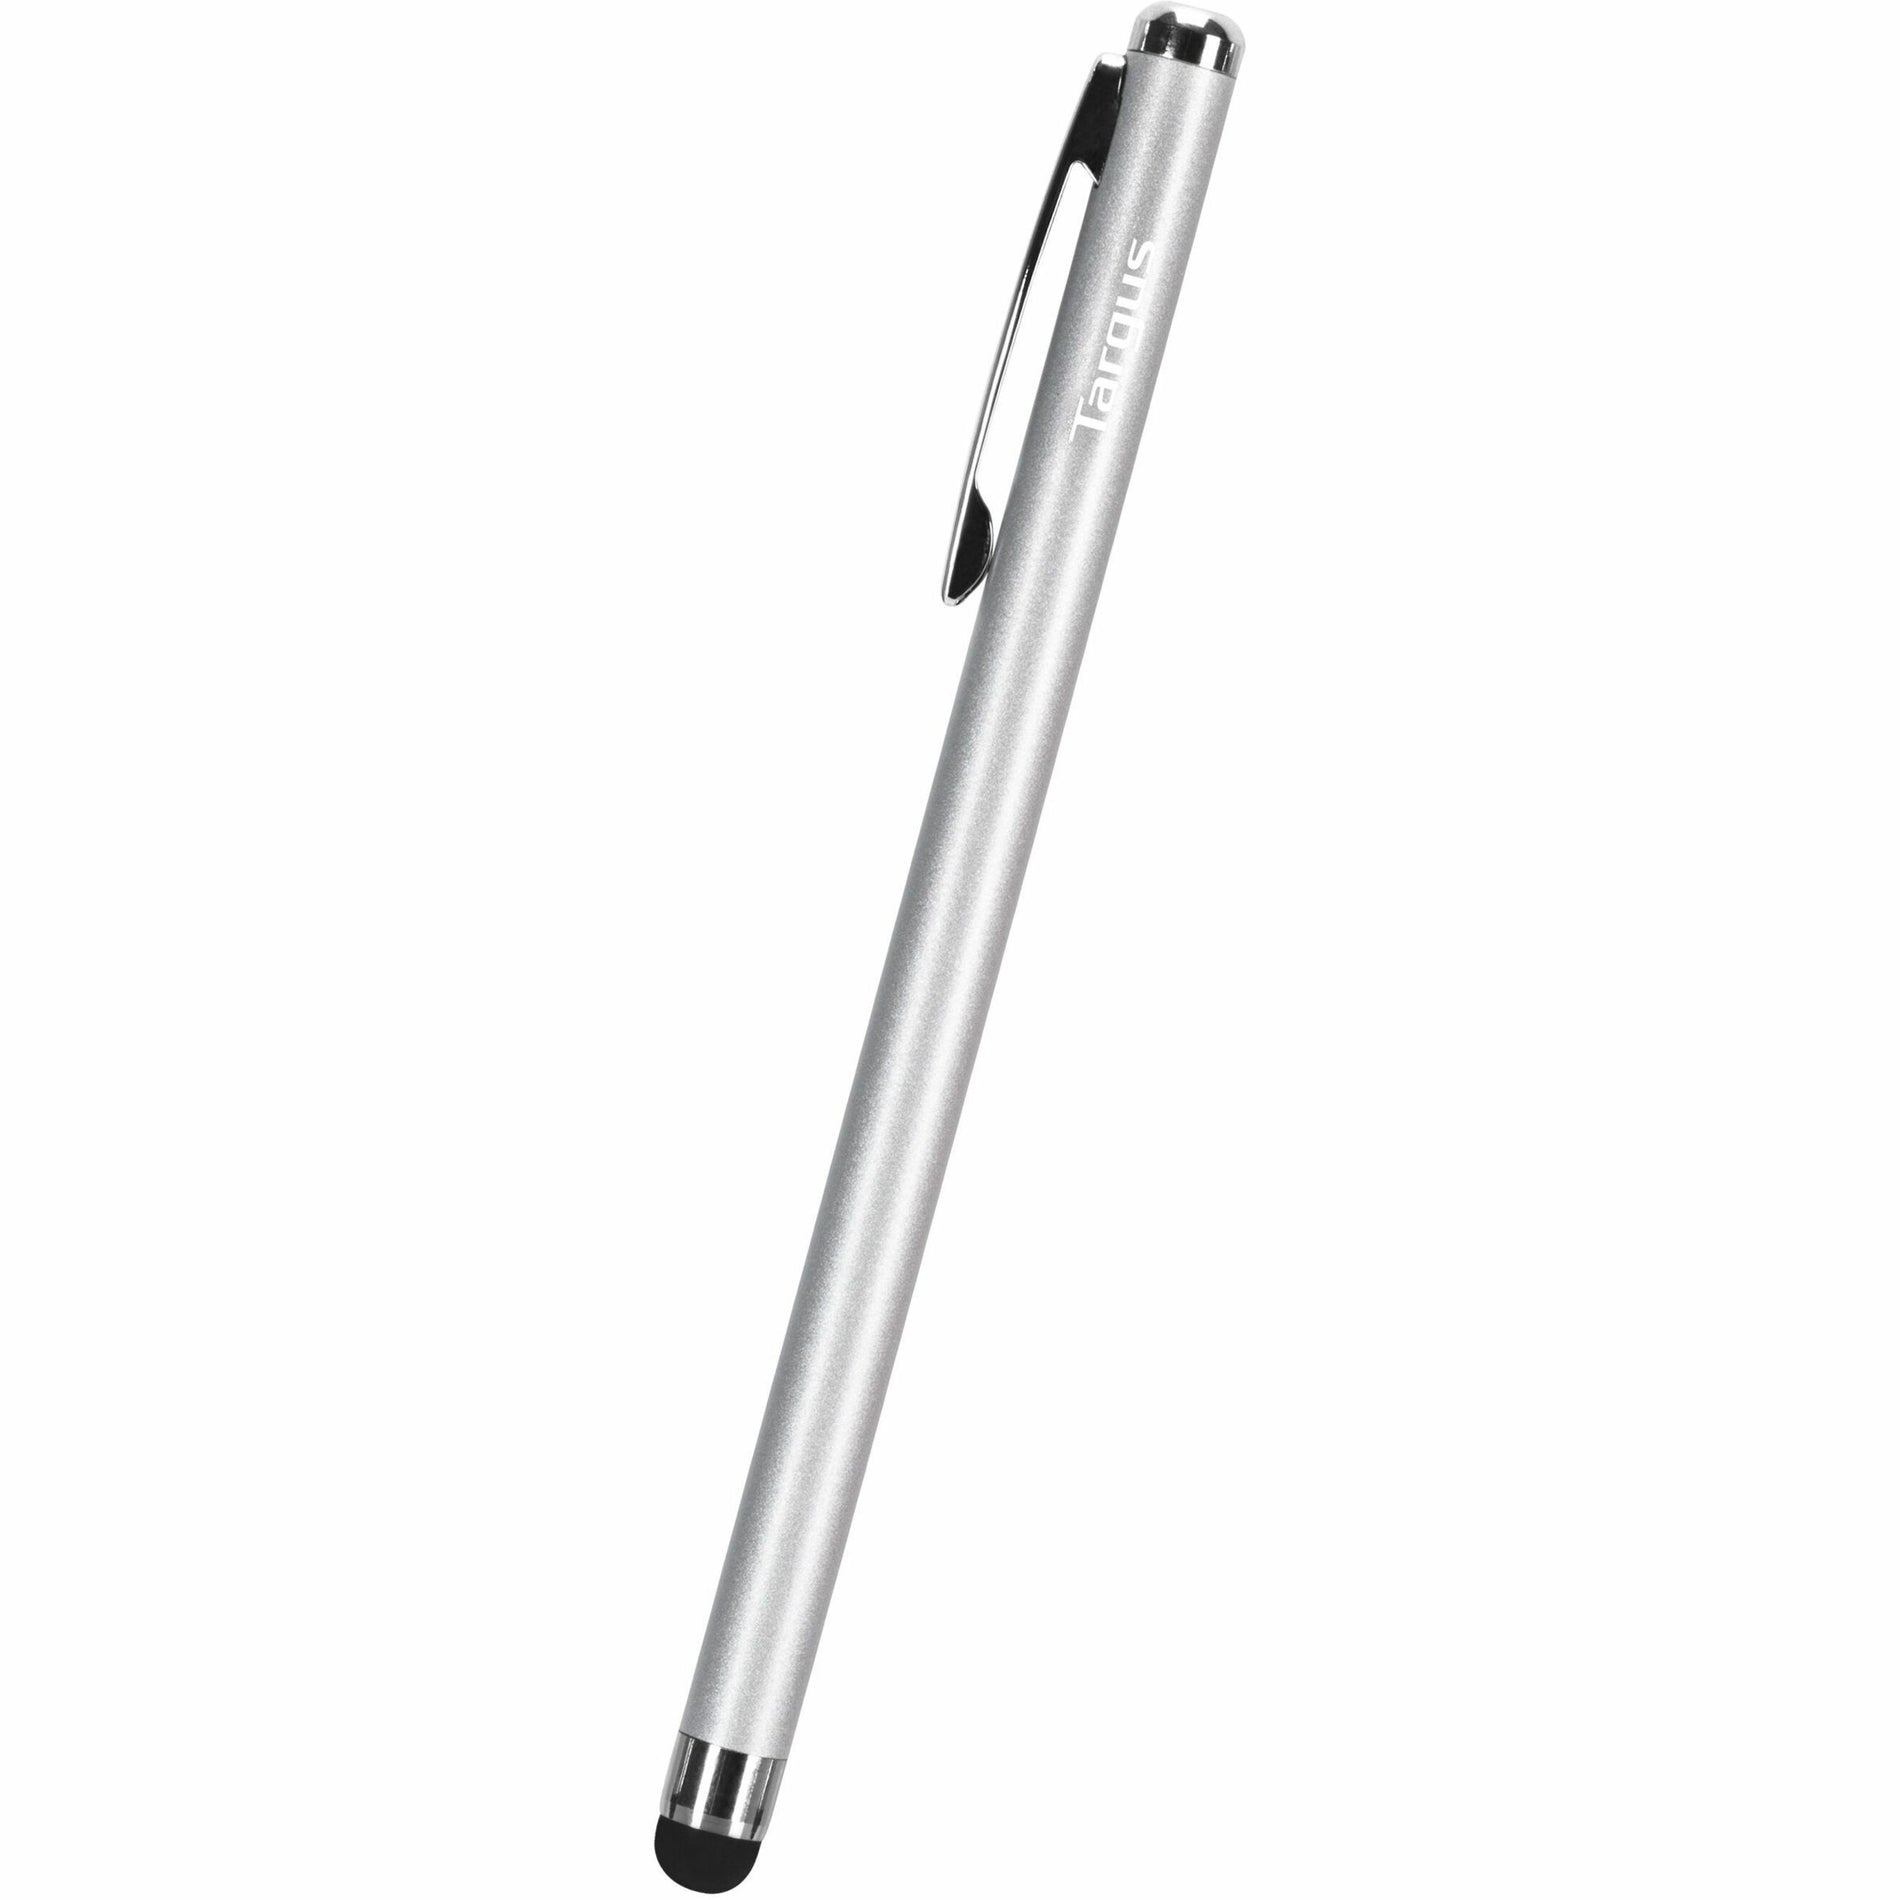 Targus Slim Stylus for Smartphones - Enhance Your Touchscreen Experience [Discontinued]